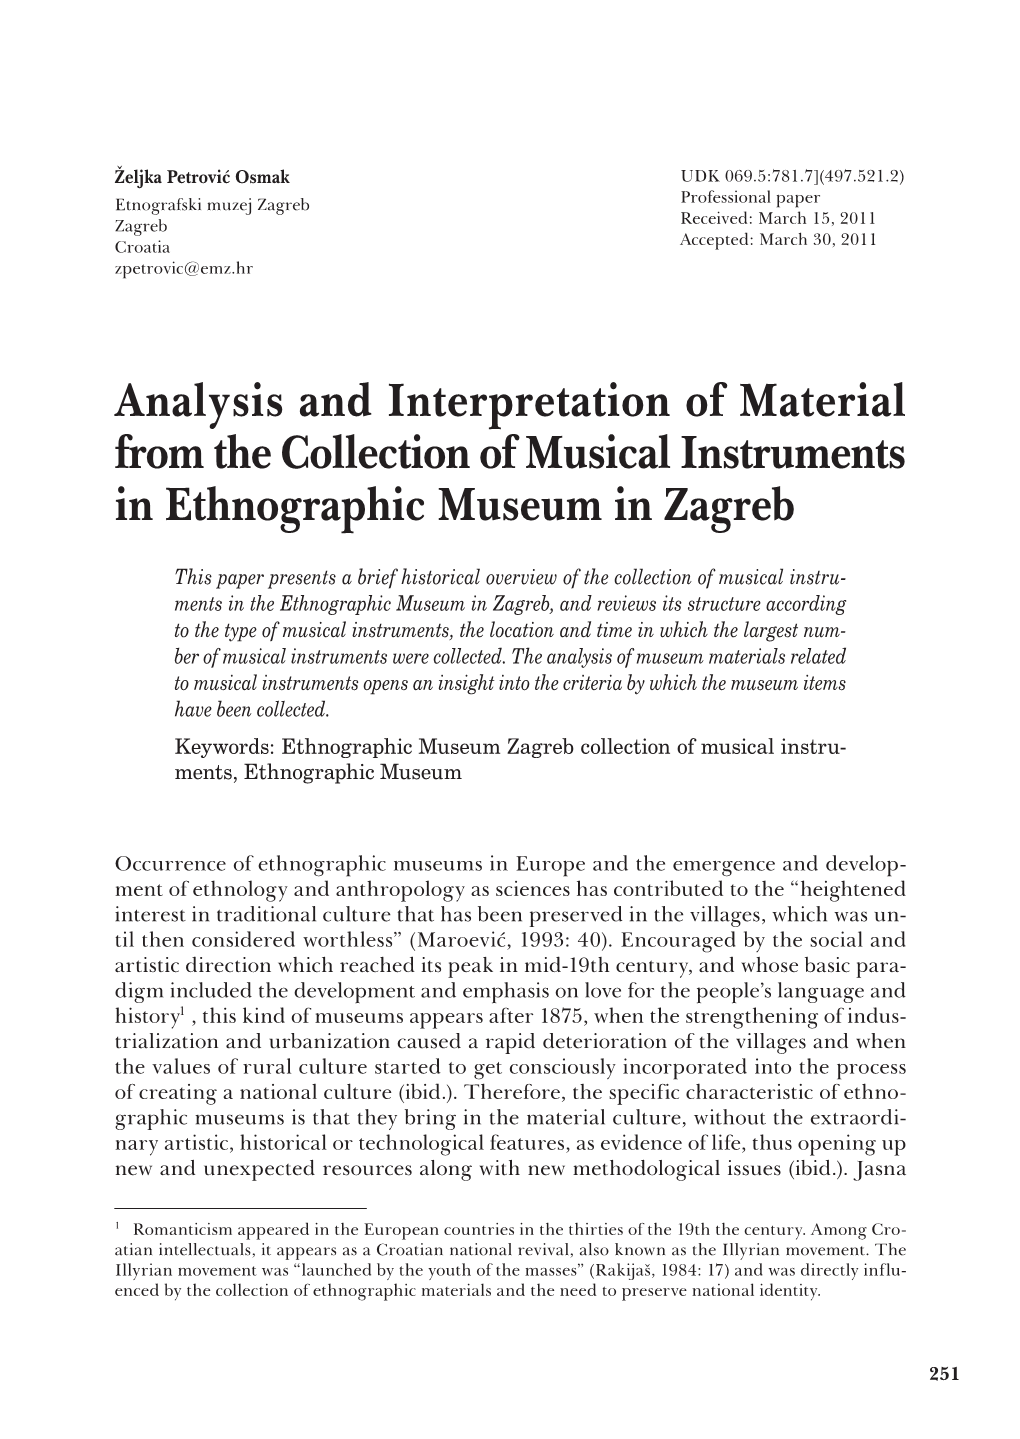 Analysis and Interpretation of Material from the Collection of Musical Instruments in Ethnographic Museum in Zagreb